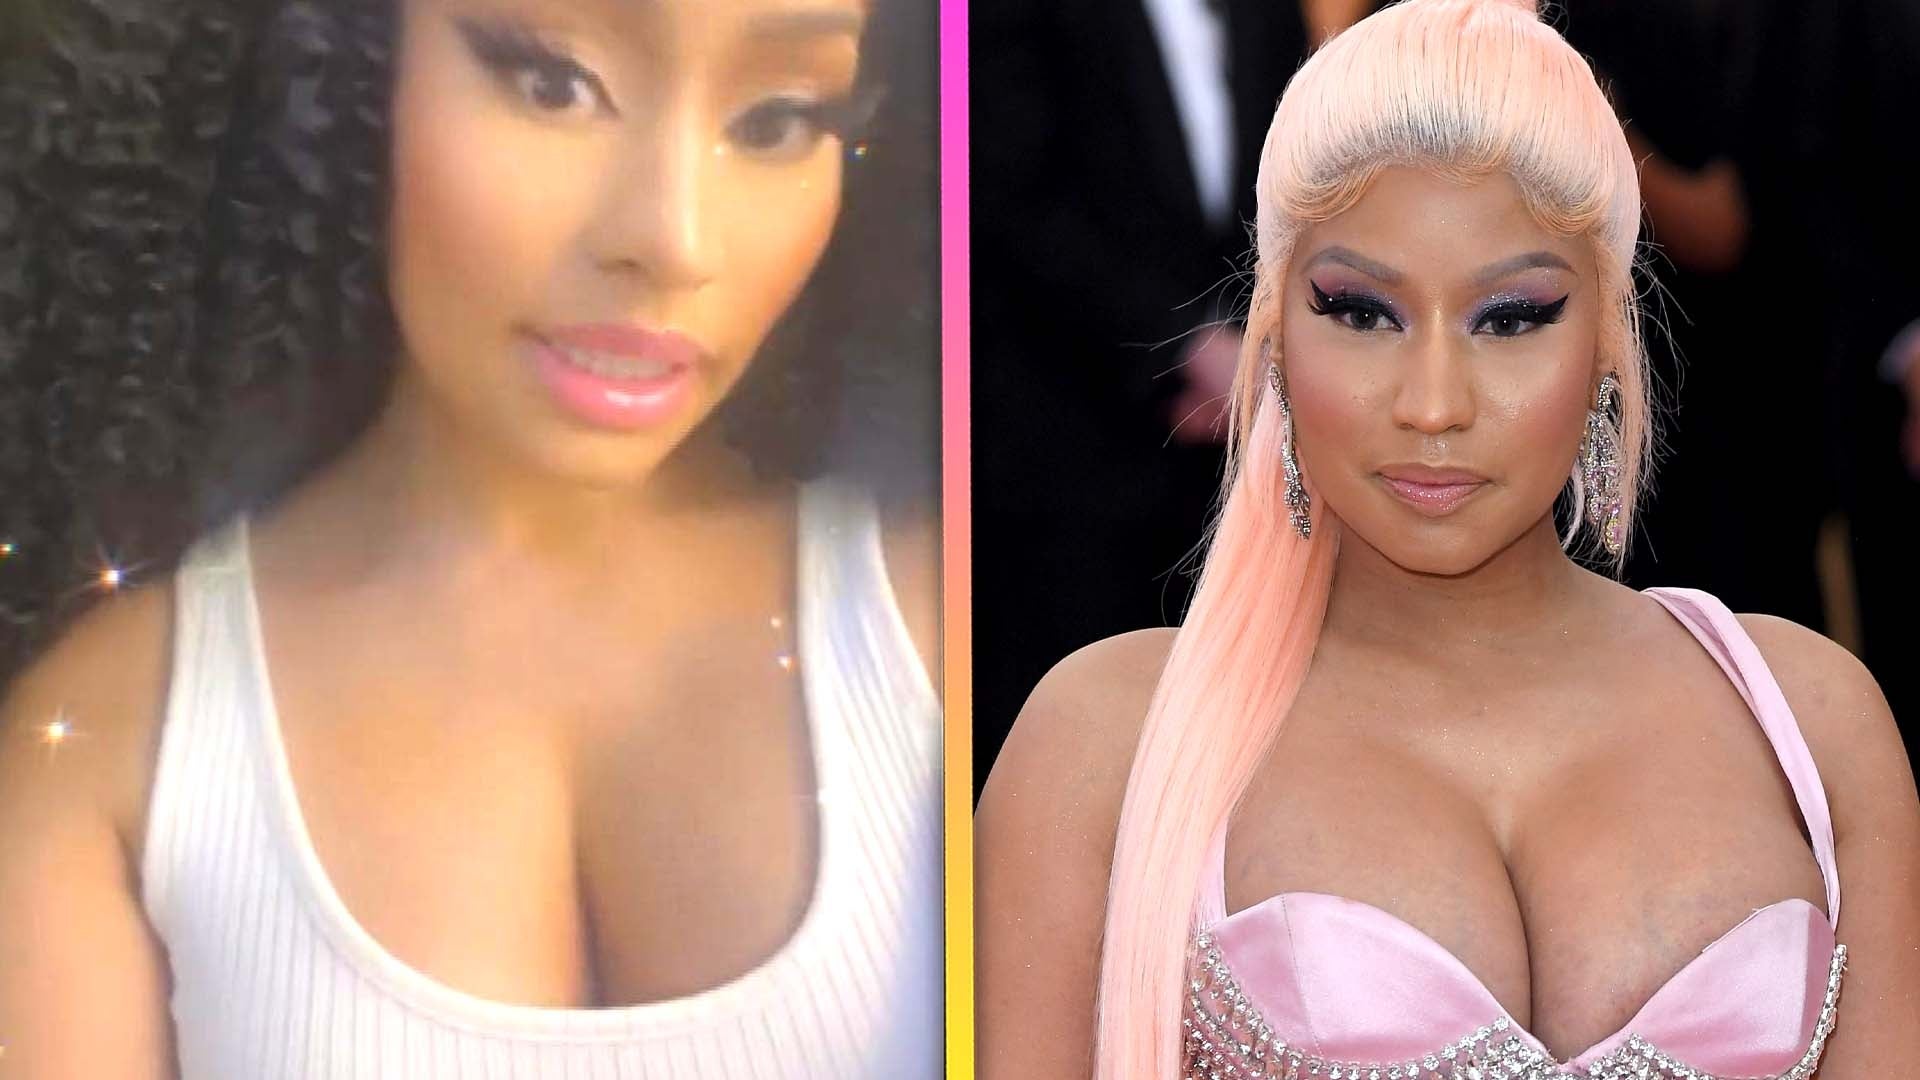 audrey lemelin recommends nicki minaj playing with her boobs pic